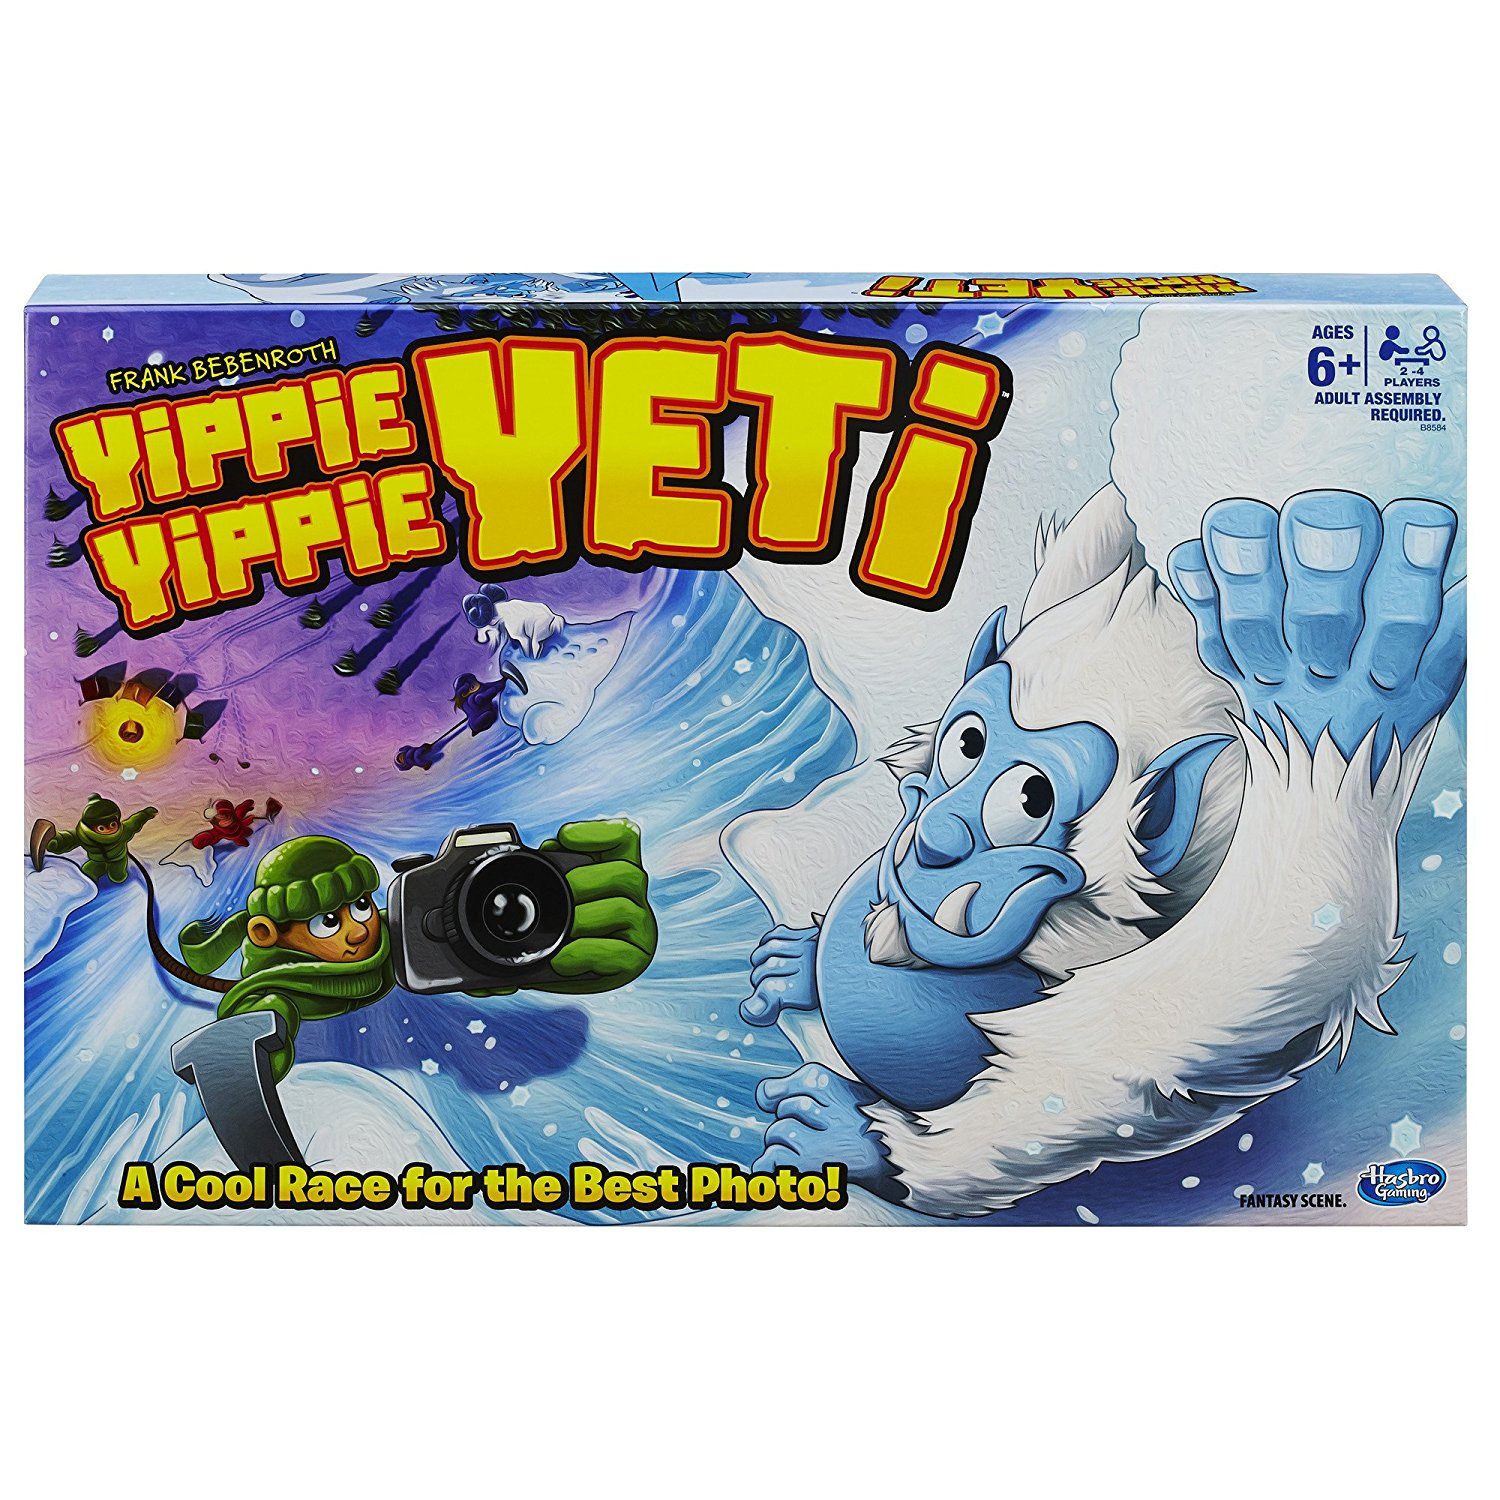 Yippie Yippie Yeti Game By Hasbro Only $7.00! (Add-On Item – Reg $34.99)